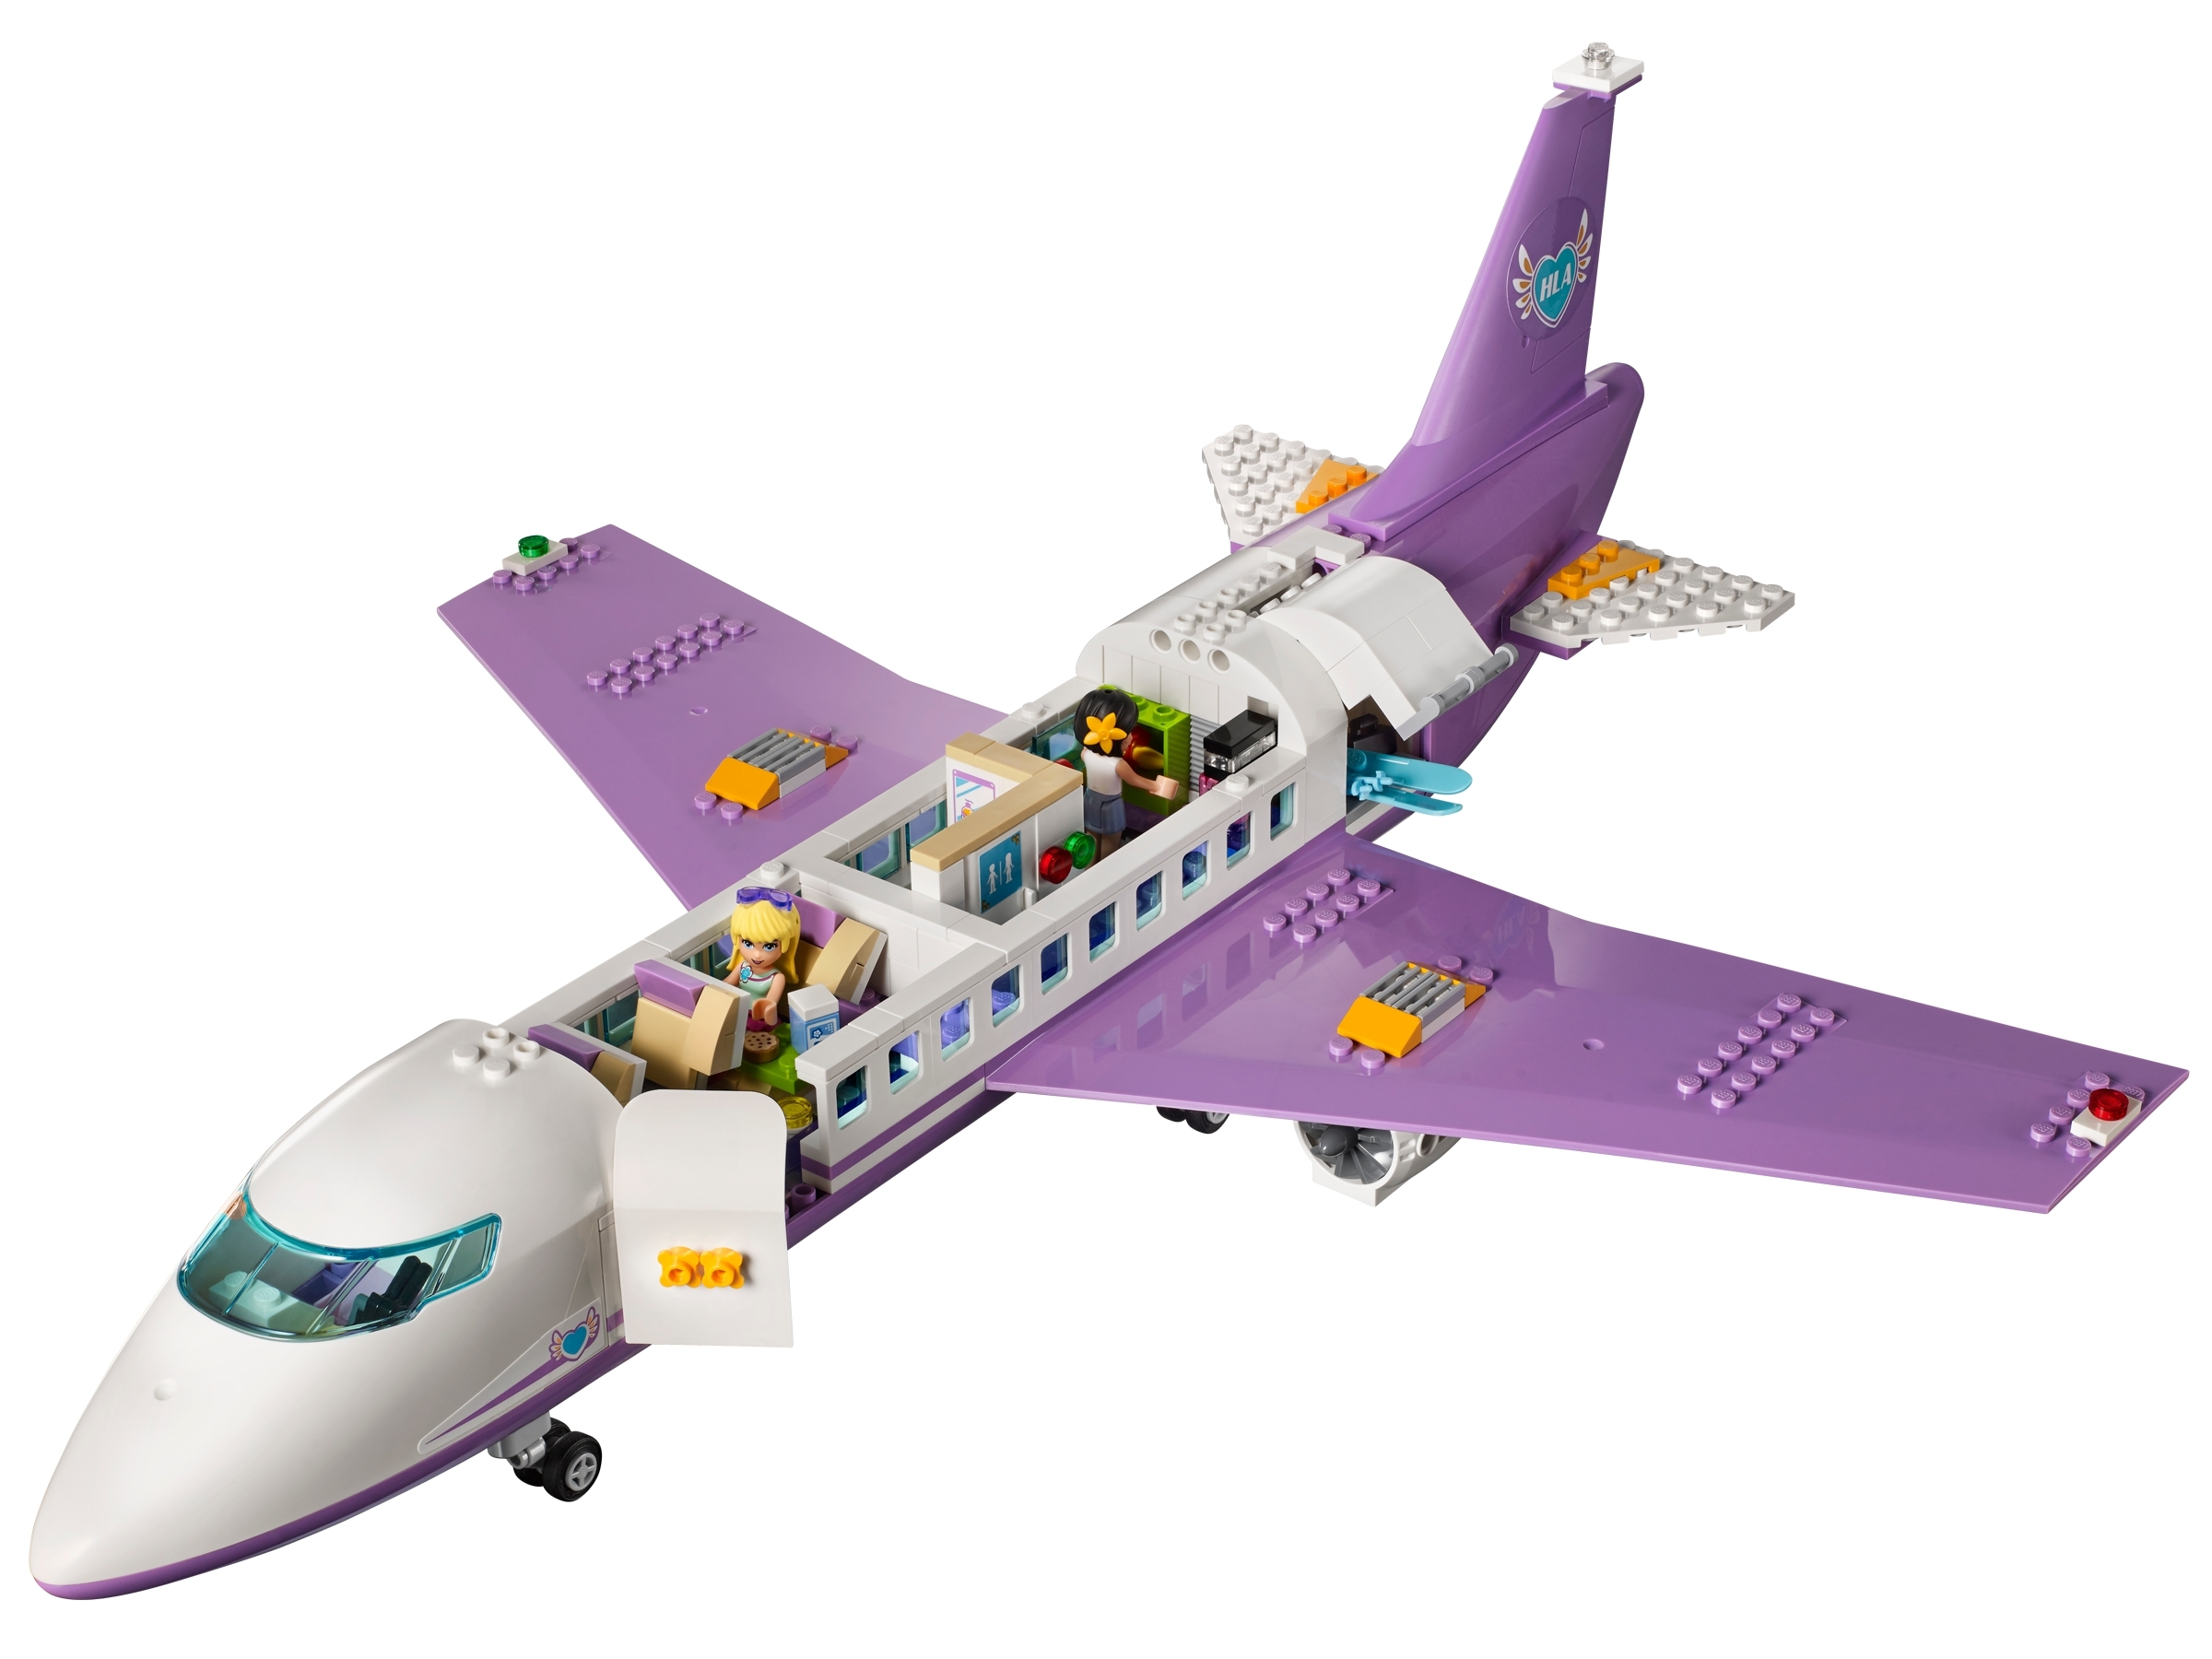 Lego Friends Airplane Set Instructions The Best and Latest Aircraft 2019